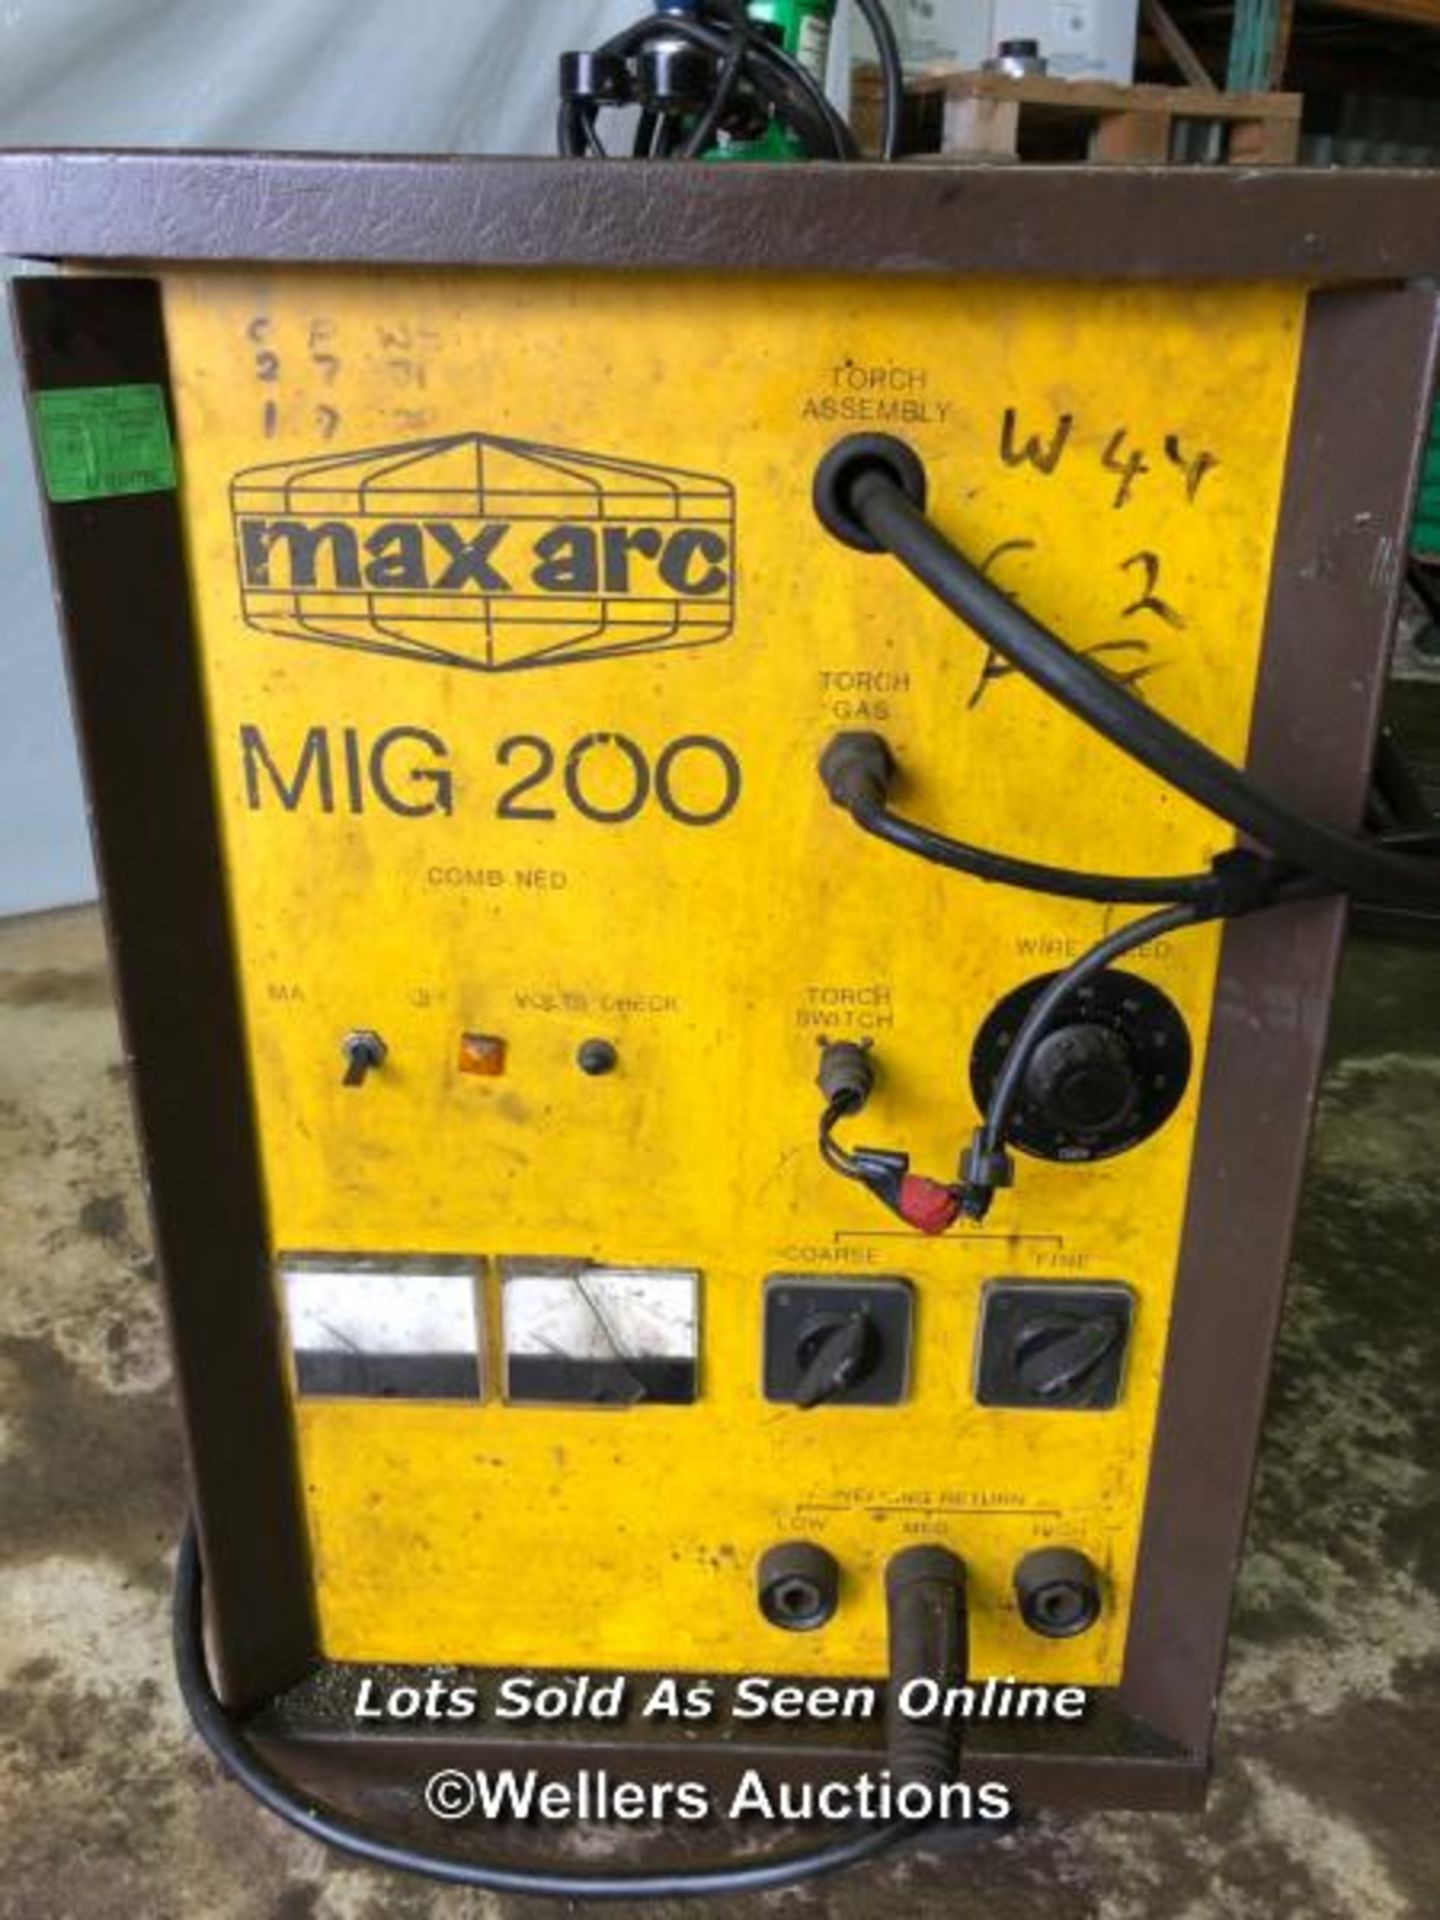 MAX ARC MIG 200 3 PHASE WELDER, CONTENTS INCL. WIRE, FACE SHIELD, AND GAS BOTTLE, IN WORKING ORDER - Image 2 of 5